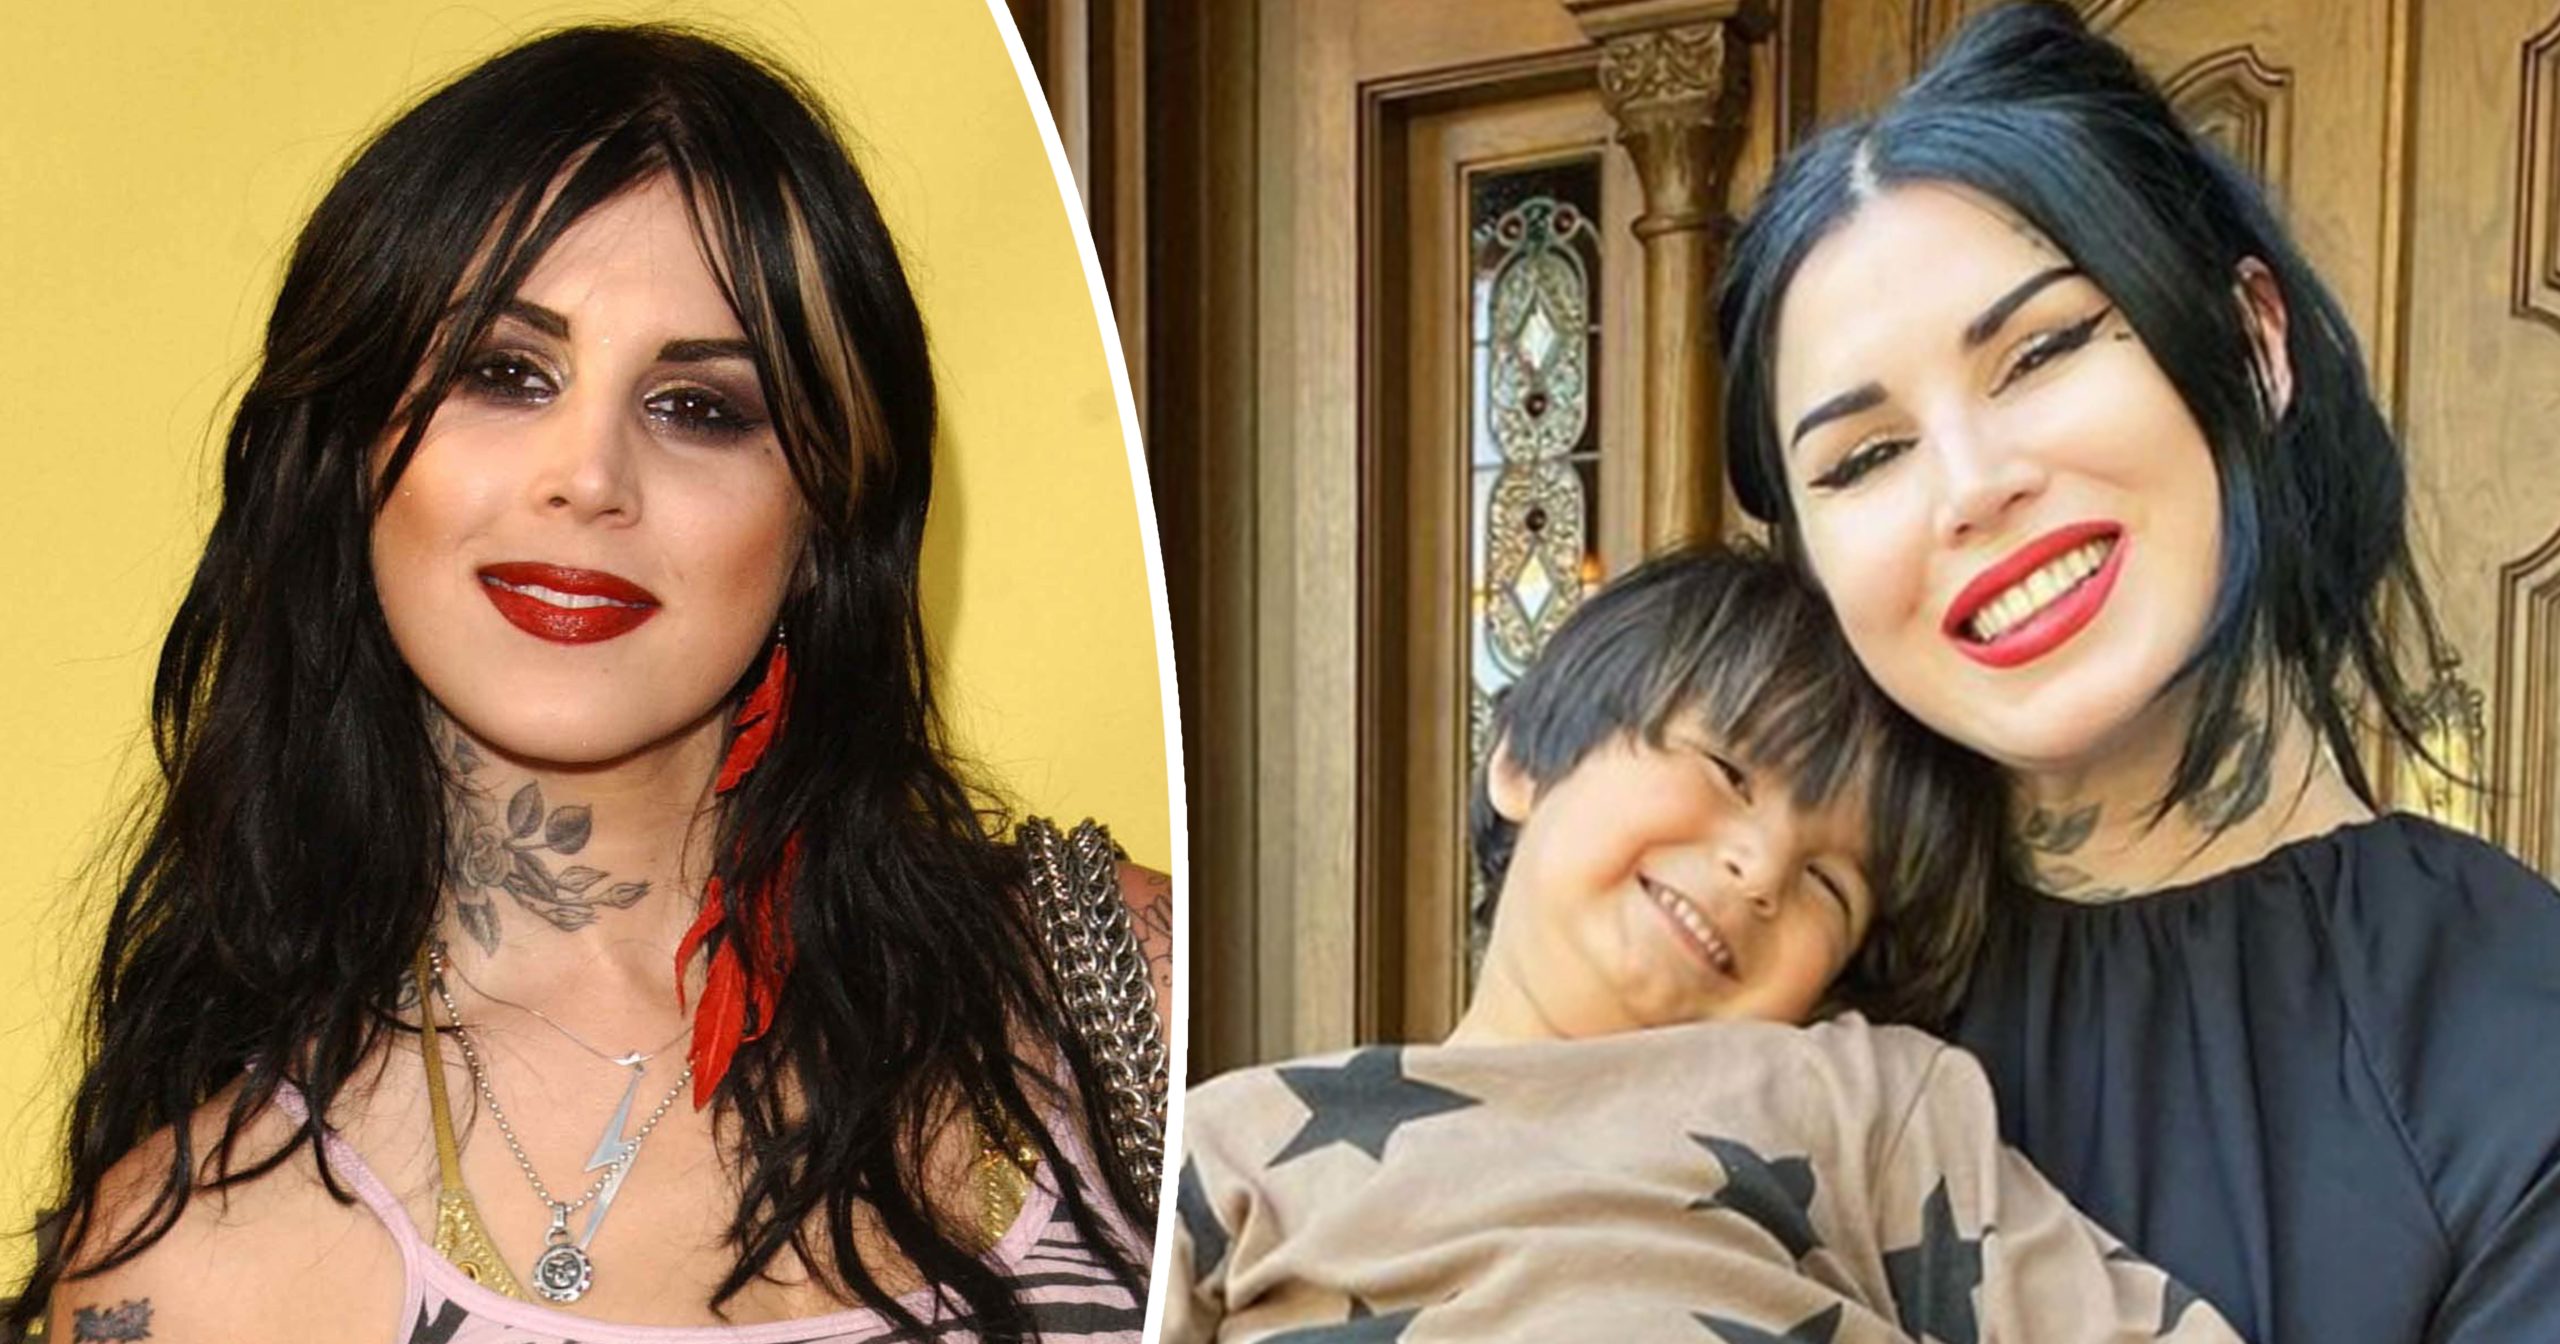 Kat Von D left 'Miami Ink' and a loving mother and wife: Inside her life